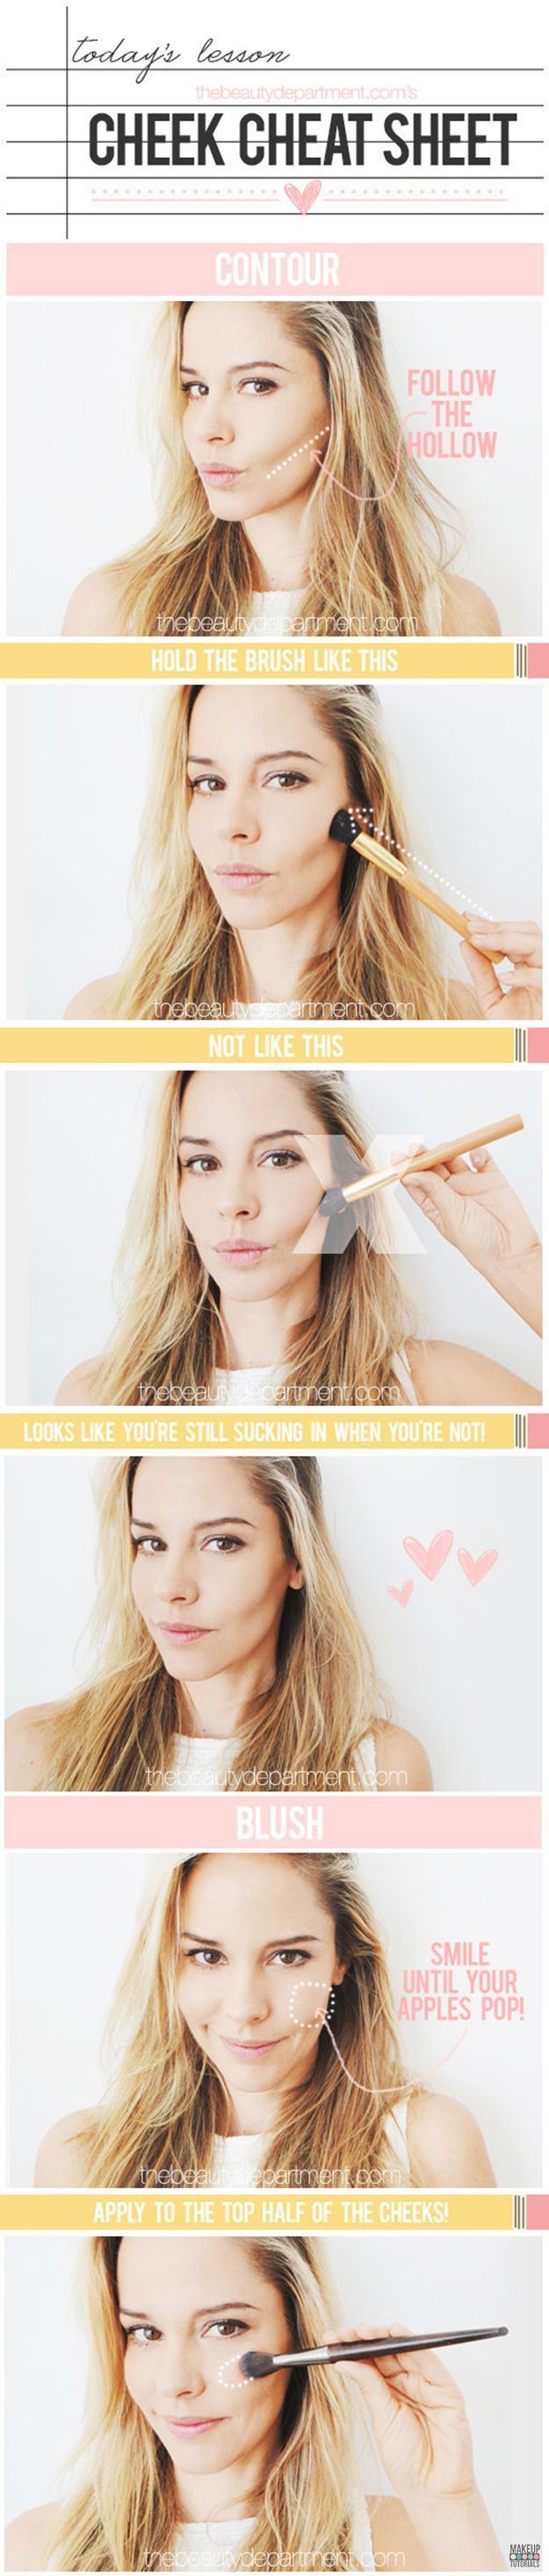 59 DIY Beauty Tutorials | Beauty Hacks You Need To Know About by Makeup Tutorial...